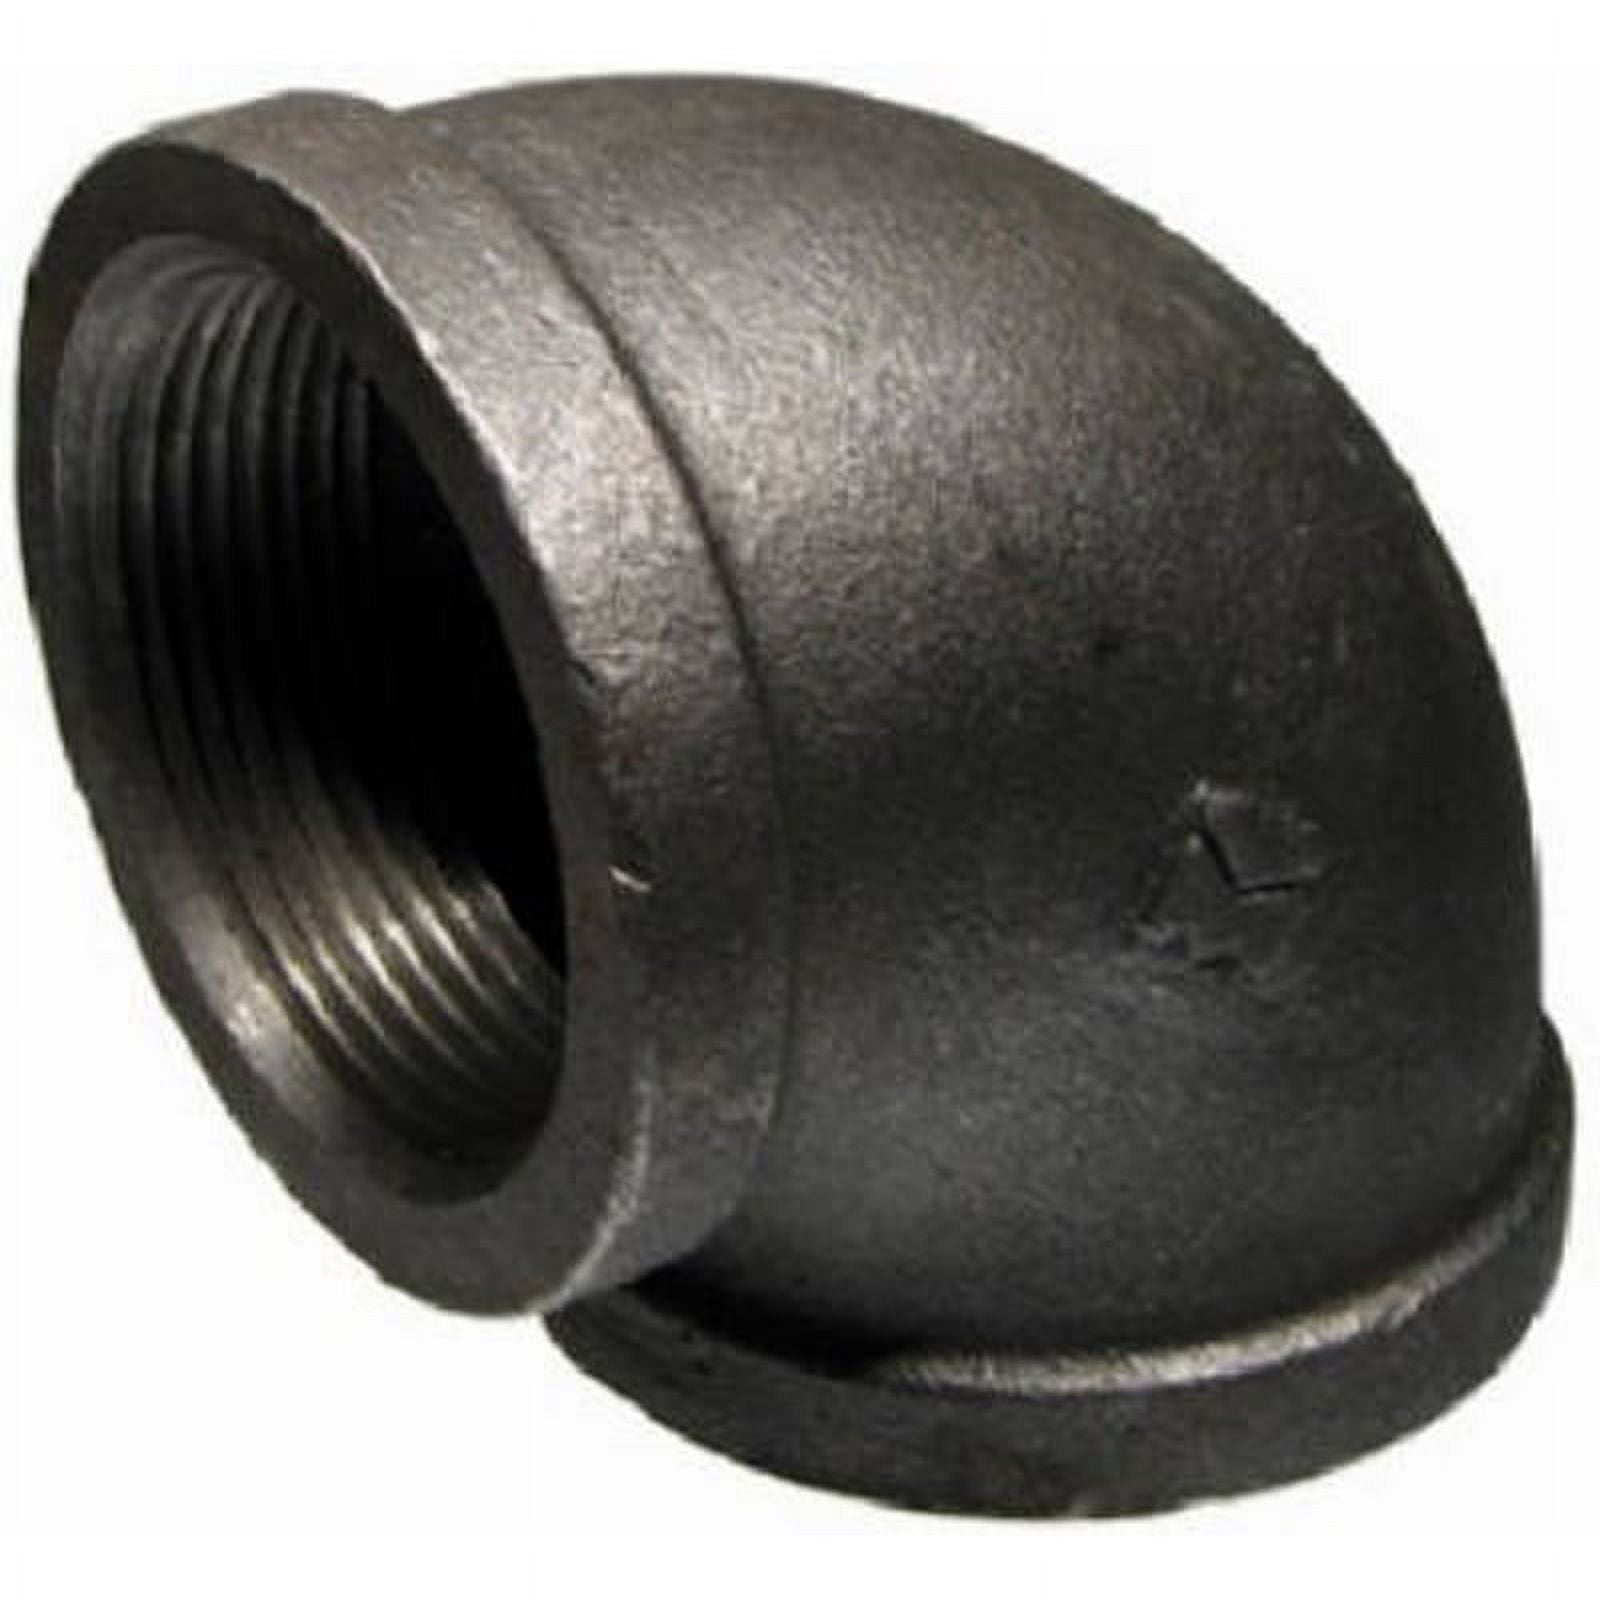 4908471 Southland 4 In. Fpt X 4 In. Dia. Fpt Black Malleable Iron 90 Deg Elbow